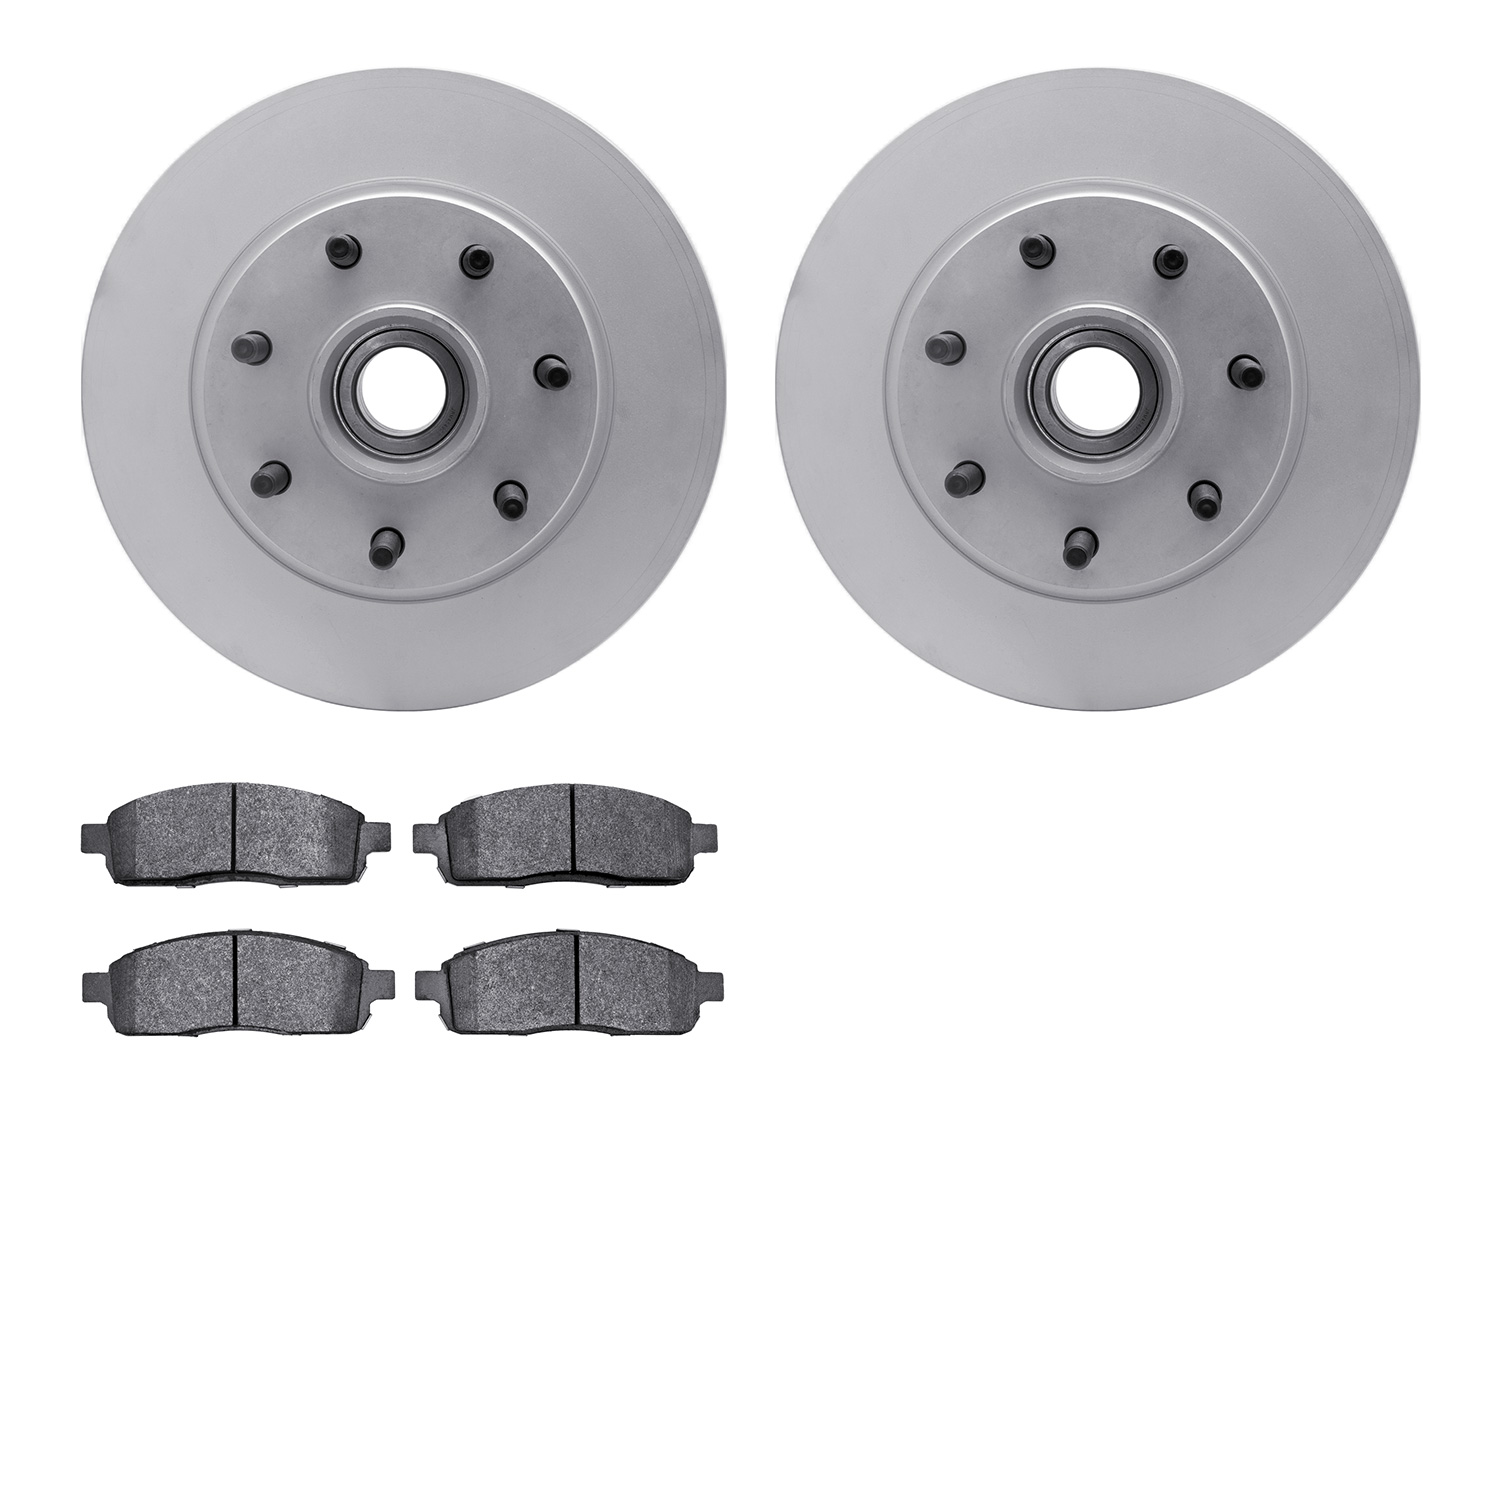 4402-54046 Geospec Brake Rotors with Ultimate-Duty Brake Pads Kit, 2004-2008 Ford/Lincoln/Mercury/Mazda, Position: Front